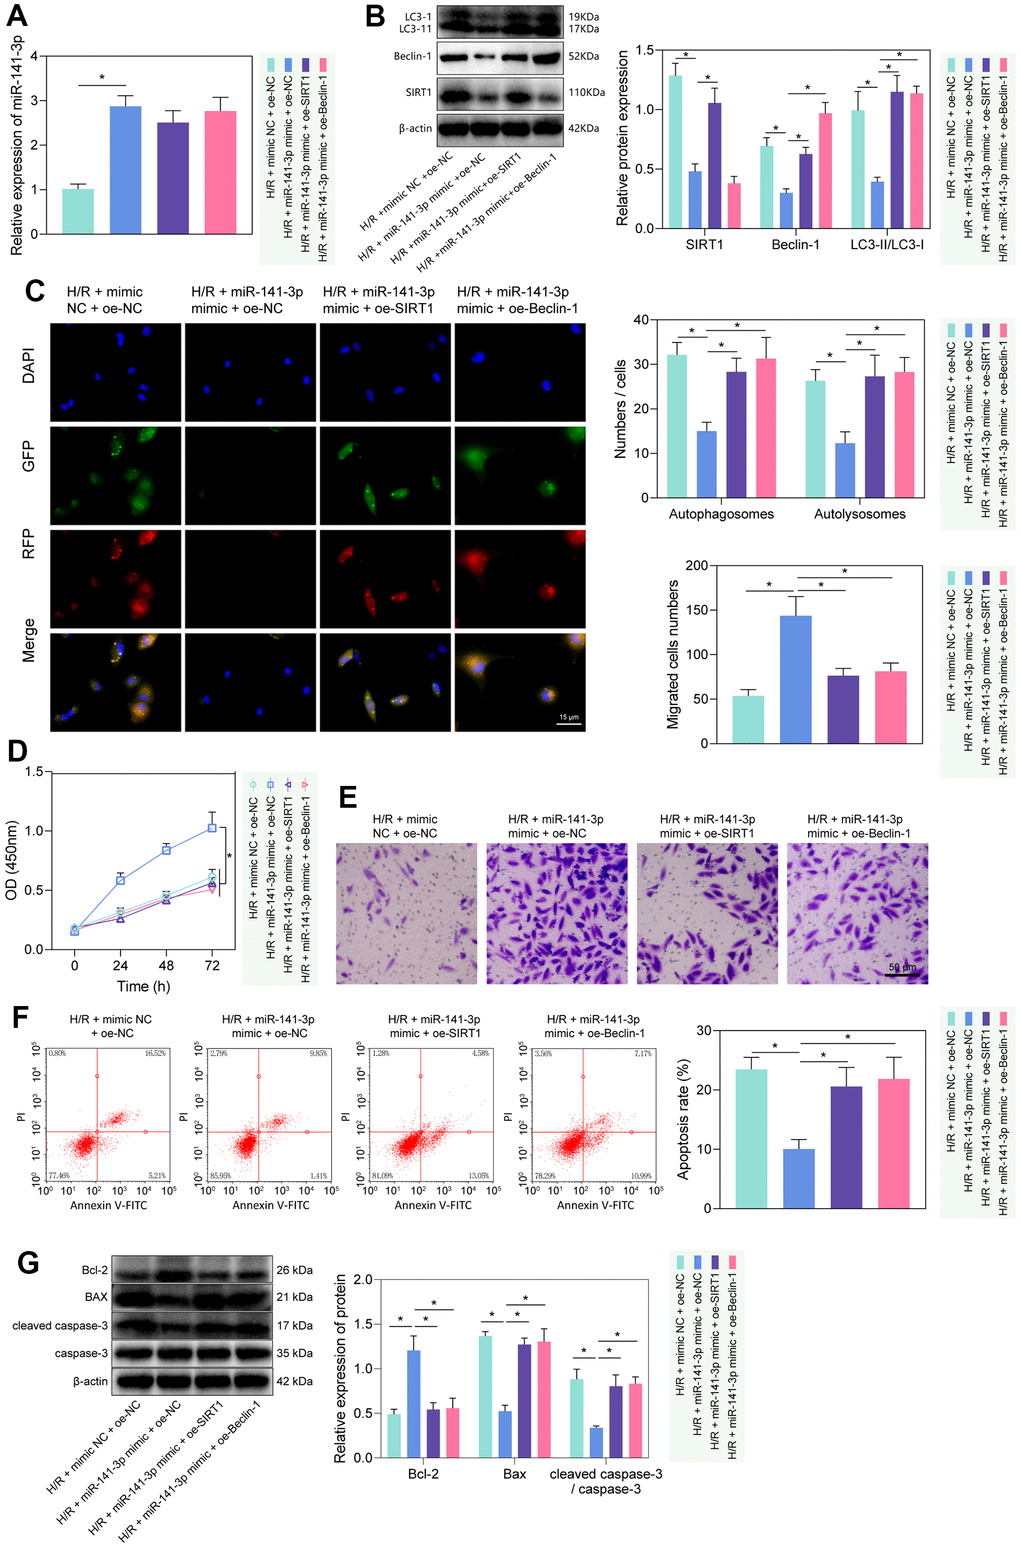 miR-141-3p mimic suppressed PMVEC autophagy and injury via the SIRT1/Beclin-1 axis. (A) The expression of miR-141-3p detected by RT-qPCR in H/R-exposed PMVECs treated with miR-141-3p mimic alone or combined with oe-SIRT1 or oe-Beclin-1. (B) The expression of SIRT1, Beclin-1, LC3-I/LC3-II detected by Western blot in H/R-exposed PMVECs treated with miR-141-3p mimic alone or combined with oe-SIRT1 or oe-Beclin-1. (C) mRFP-GFP-LC3 dual fluorescence system was used to trace autophagy formation in H/R-exposed PMVECs treated with miR-141-3p mimic alone or combined with oe-SIRT1 or oe-Beclin-1. (D) The proliferation of H/R-exposed PMVECs treated with miR-141-3p mimic alone or combined with oe-SIRT1 or oe-Beclin-1 detected by CCK-8 assay. (E) The migration of H/R-exposed PMVECs treated with miR-141-3p mimic alone or combined with oe-SIRT1 or oe-Beclin-1 detected by Transwell assay. (F) The apoptosis of H/R-exposed PMVECs treated with miR-141-3p mimic alone or combined with oe-SIRT1 or oe-Beclin-1 detected by flow cytometry. (G) The expression of Bax, Bcl-2, cleaved caspase-3 and caspase-3 in H/R-exposed PMVECs treated with miR-141-3p mimic alone or combined with oe-SIRT1 or oe-Beclin-1 detected by Western blot. Measurement data are expressed as mean ± standard deviation. Changes between multiple groups were compared using one-way ANOVA and Tukey’s multiple comparison test. Two-way ANOVA was used for data comparison at different time points. * p 